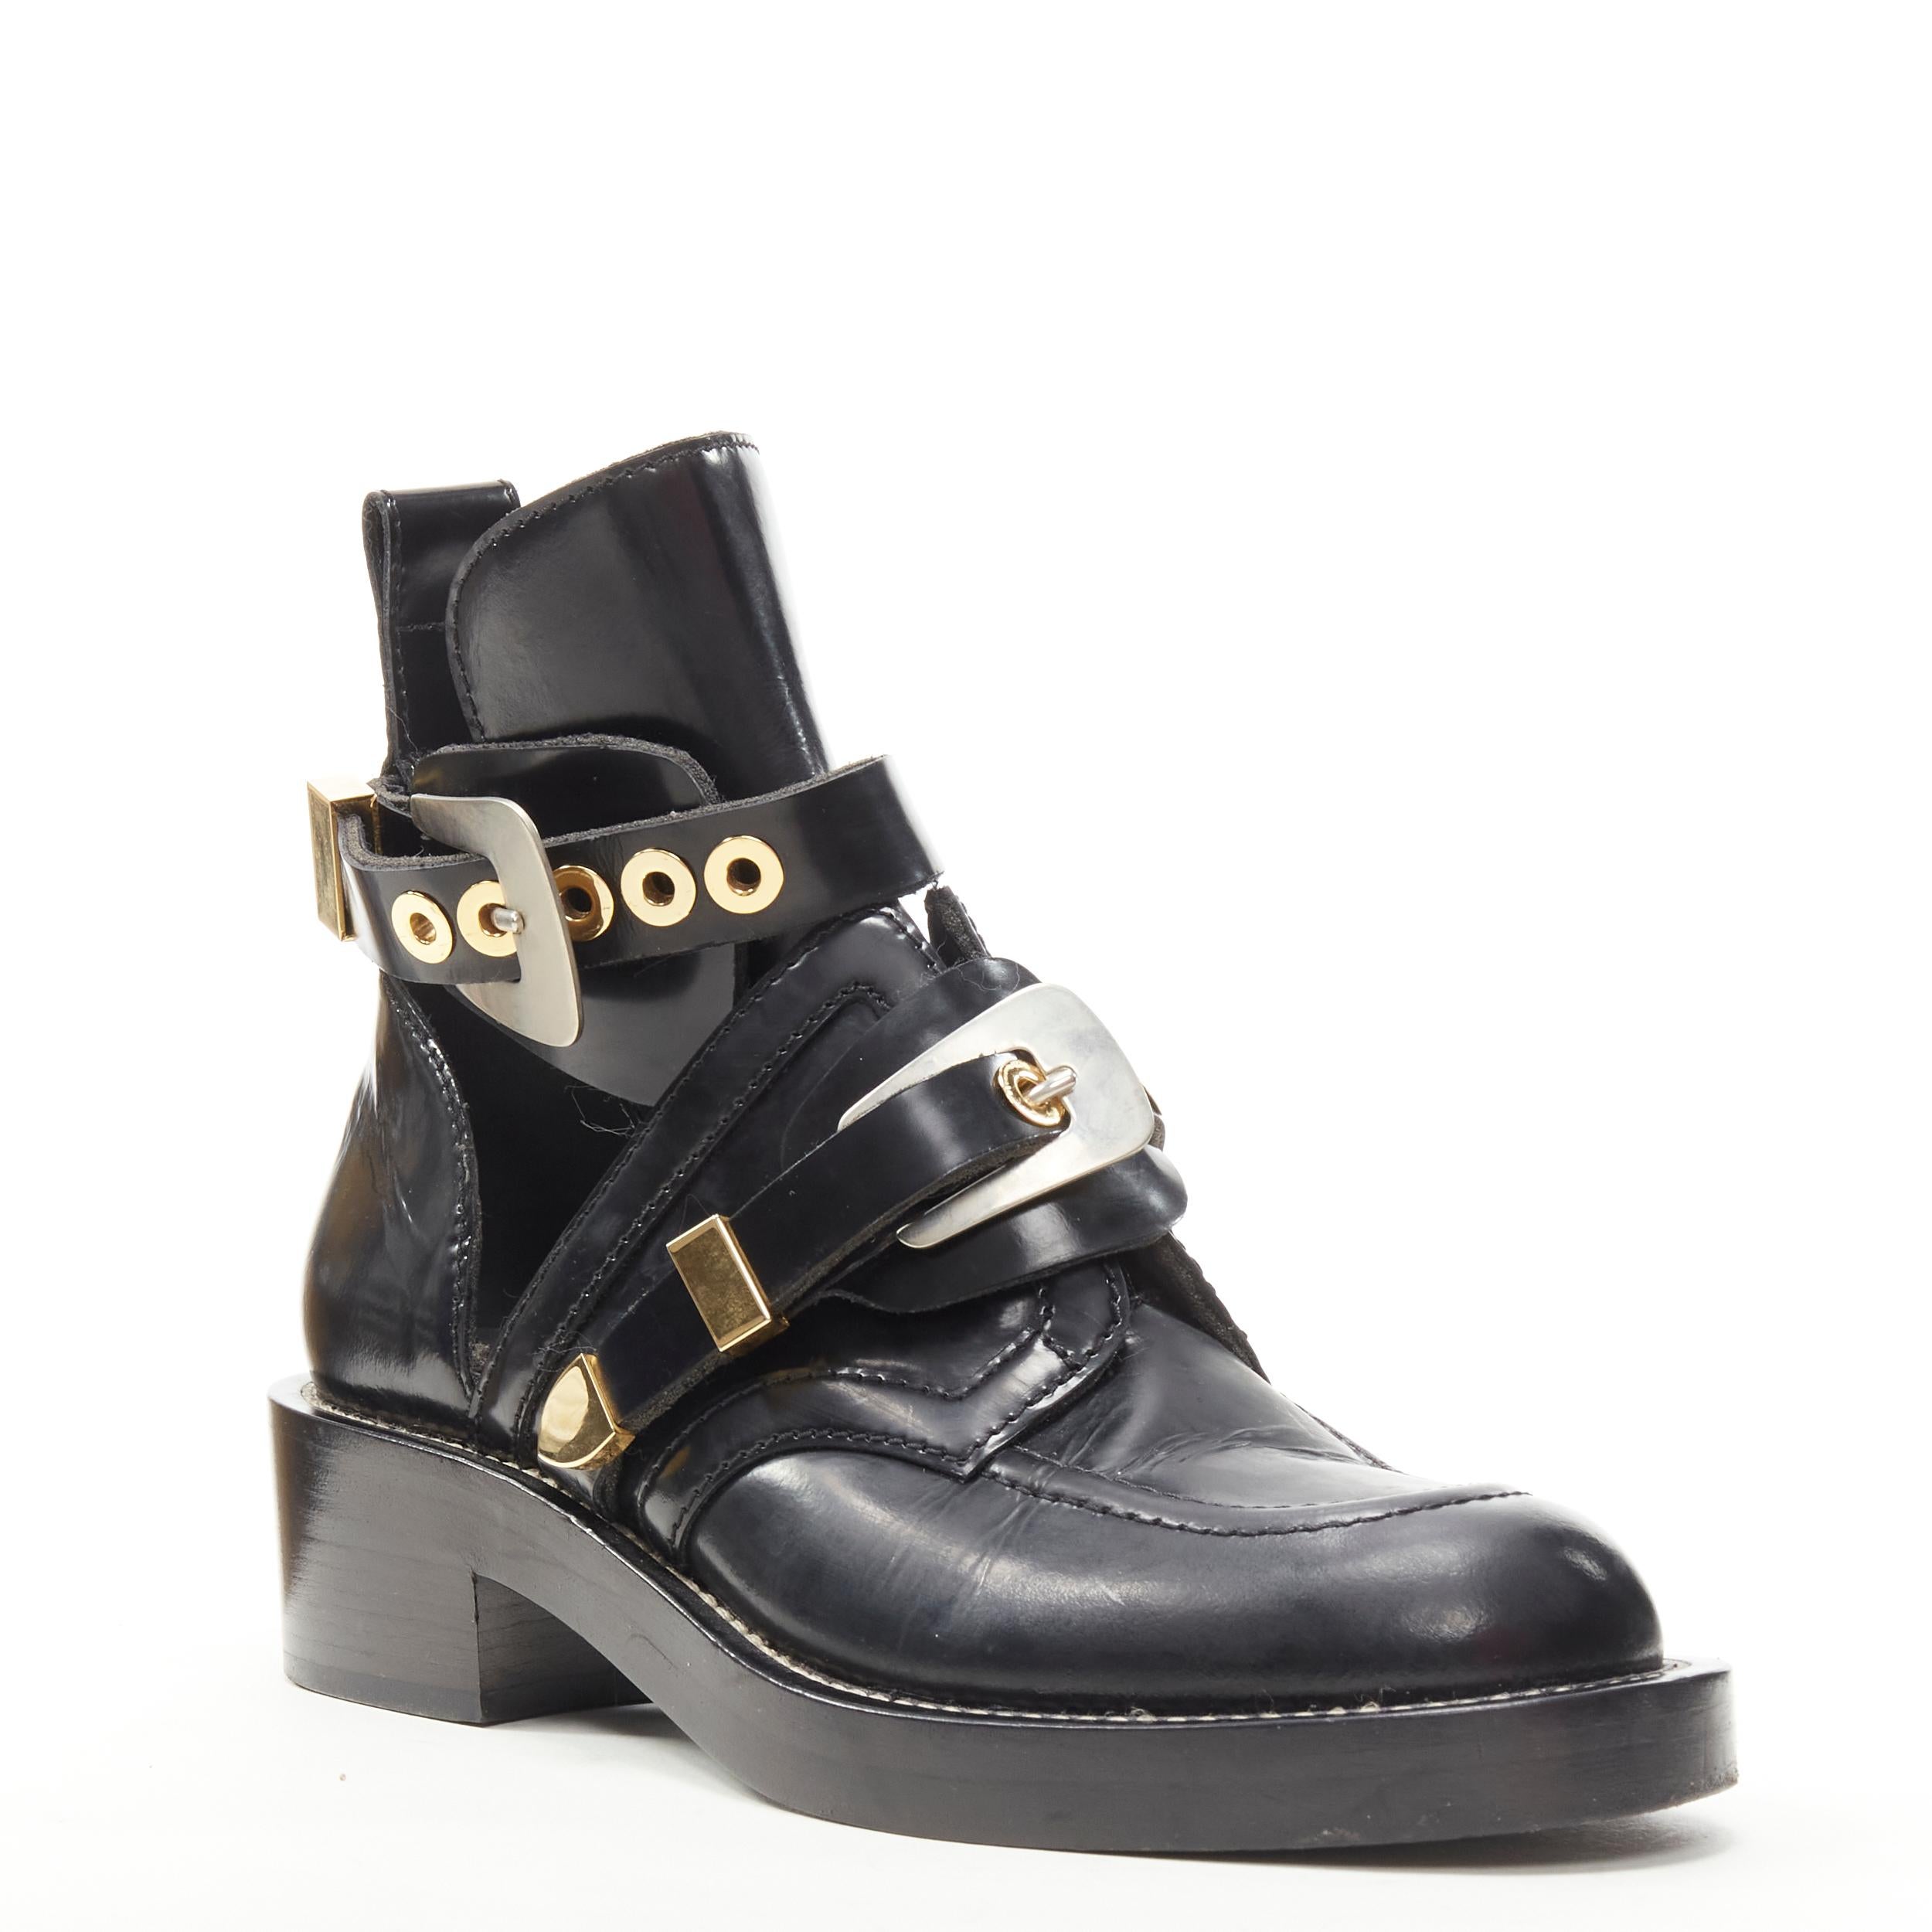 BALENCIAGA Ceinture black leather cut out mixed metals buckle moto boot EU39 
Reference: KEDG/A00122 
Brand: Balenciaga 
Material: Leather 
Color: Black 
Pattern: Solid 
Closure: Buckle 
Extra Detail: Mixed metal hardware. Polished leather upper.